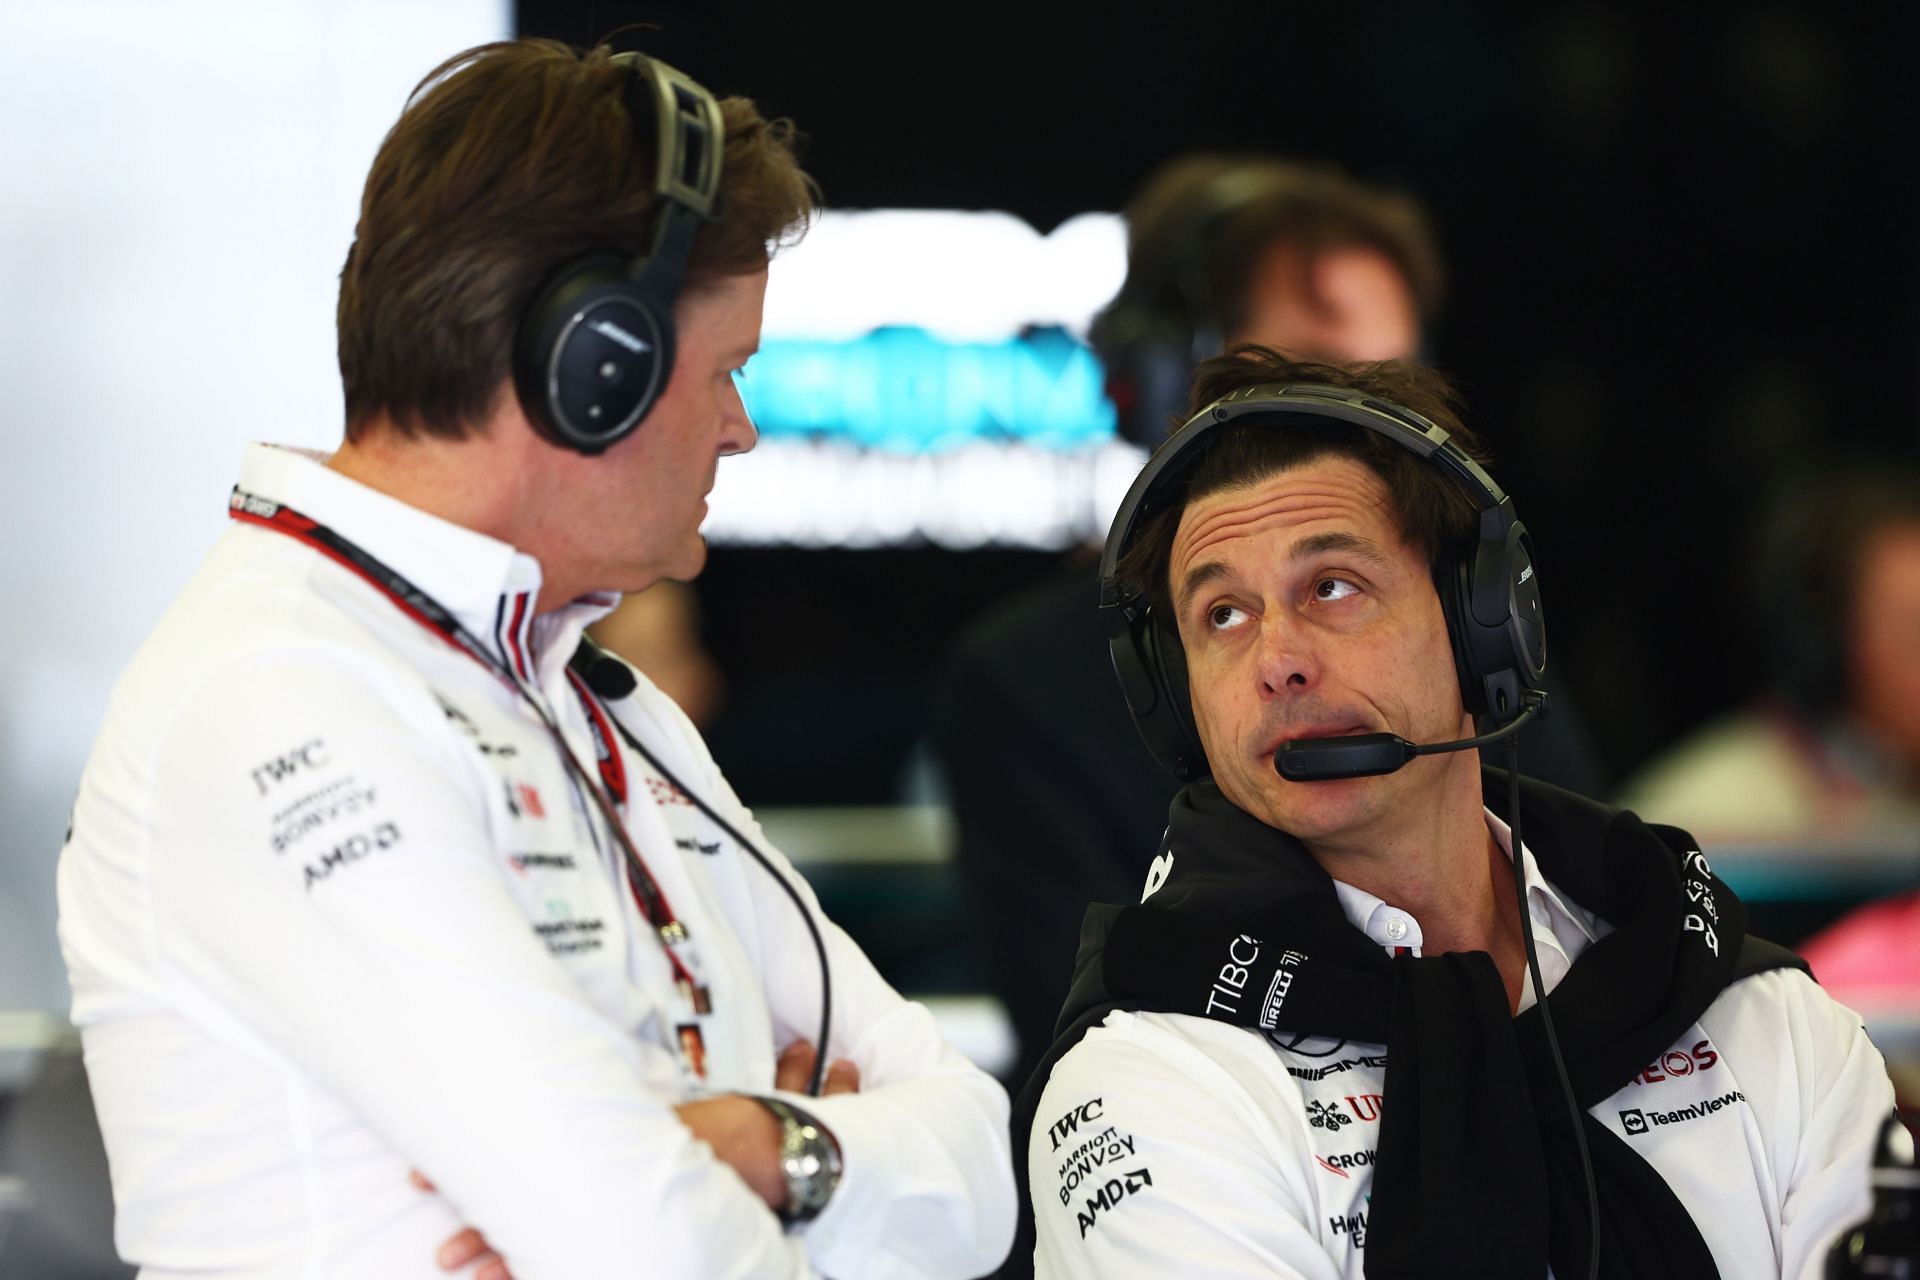 Toto Wolff has hit back on recent comments by Christian Horner